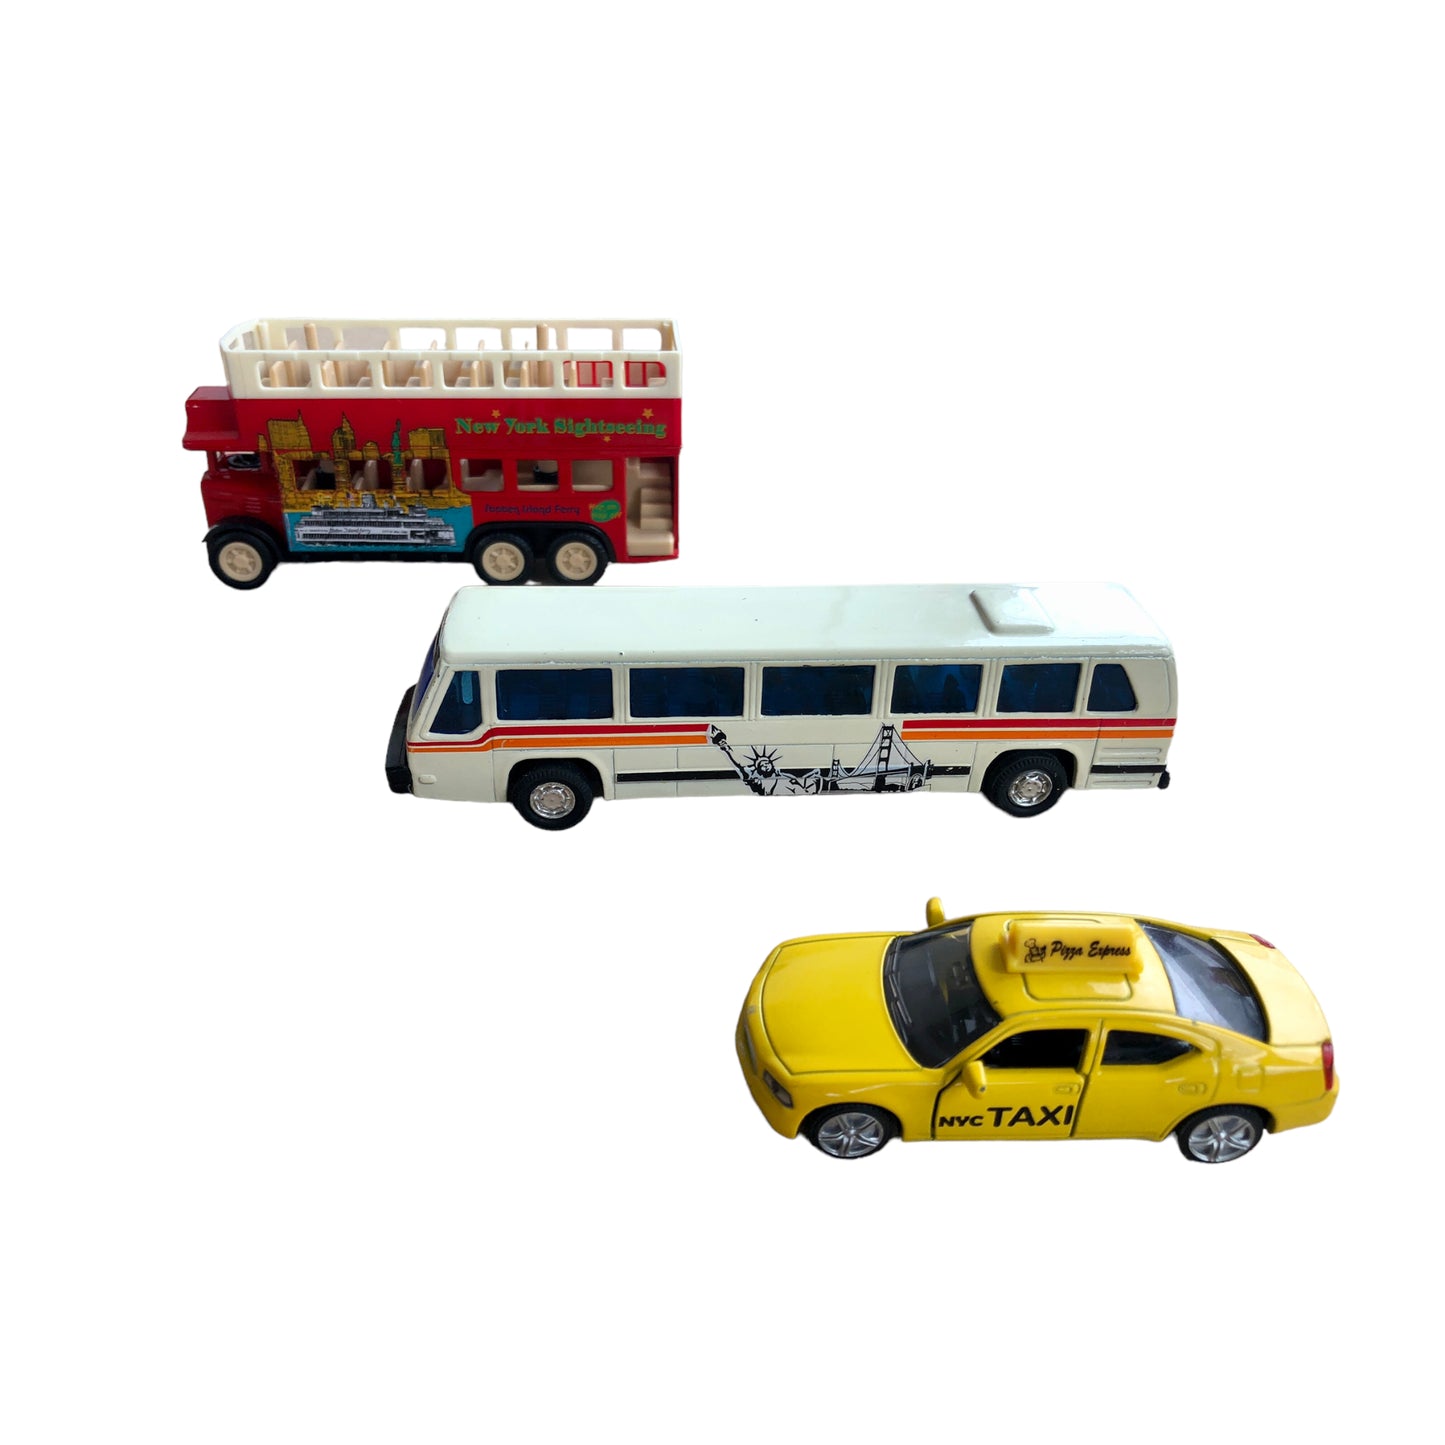 Model cars from New York